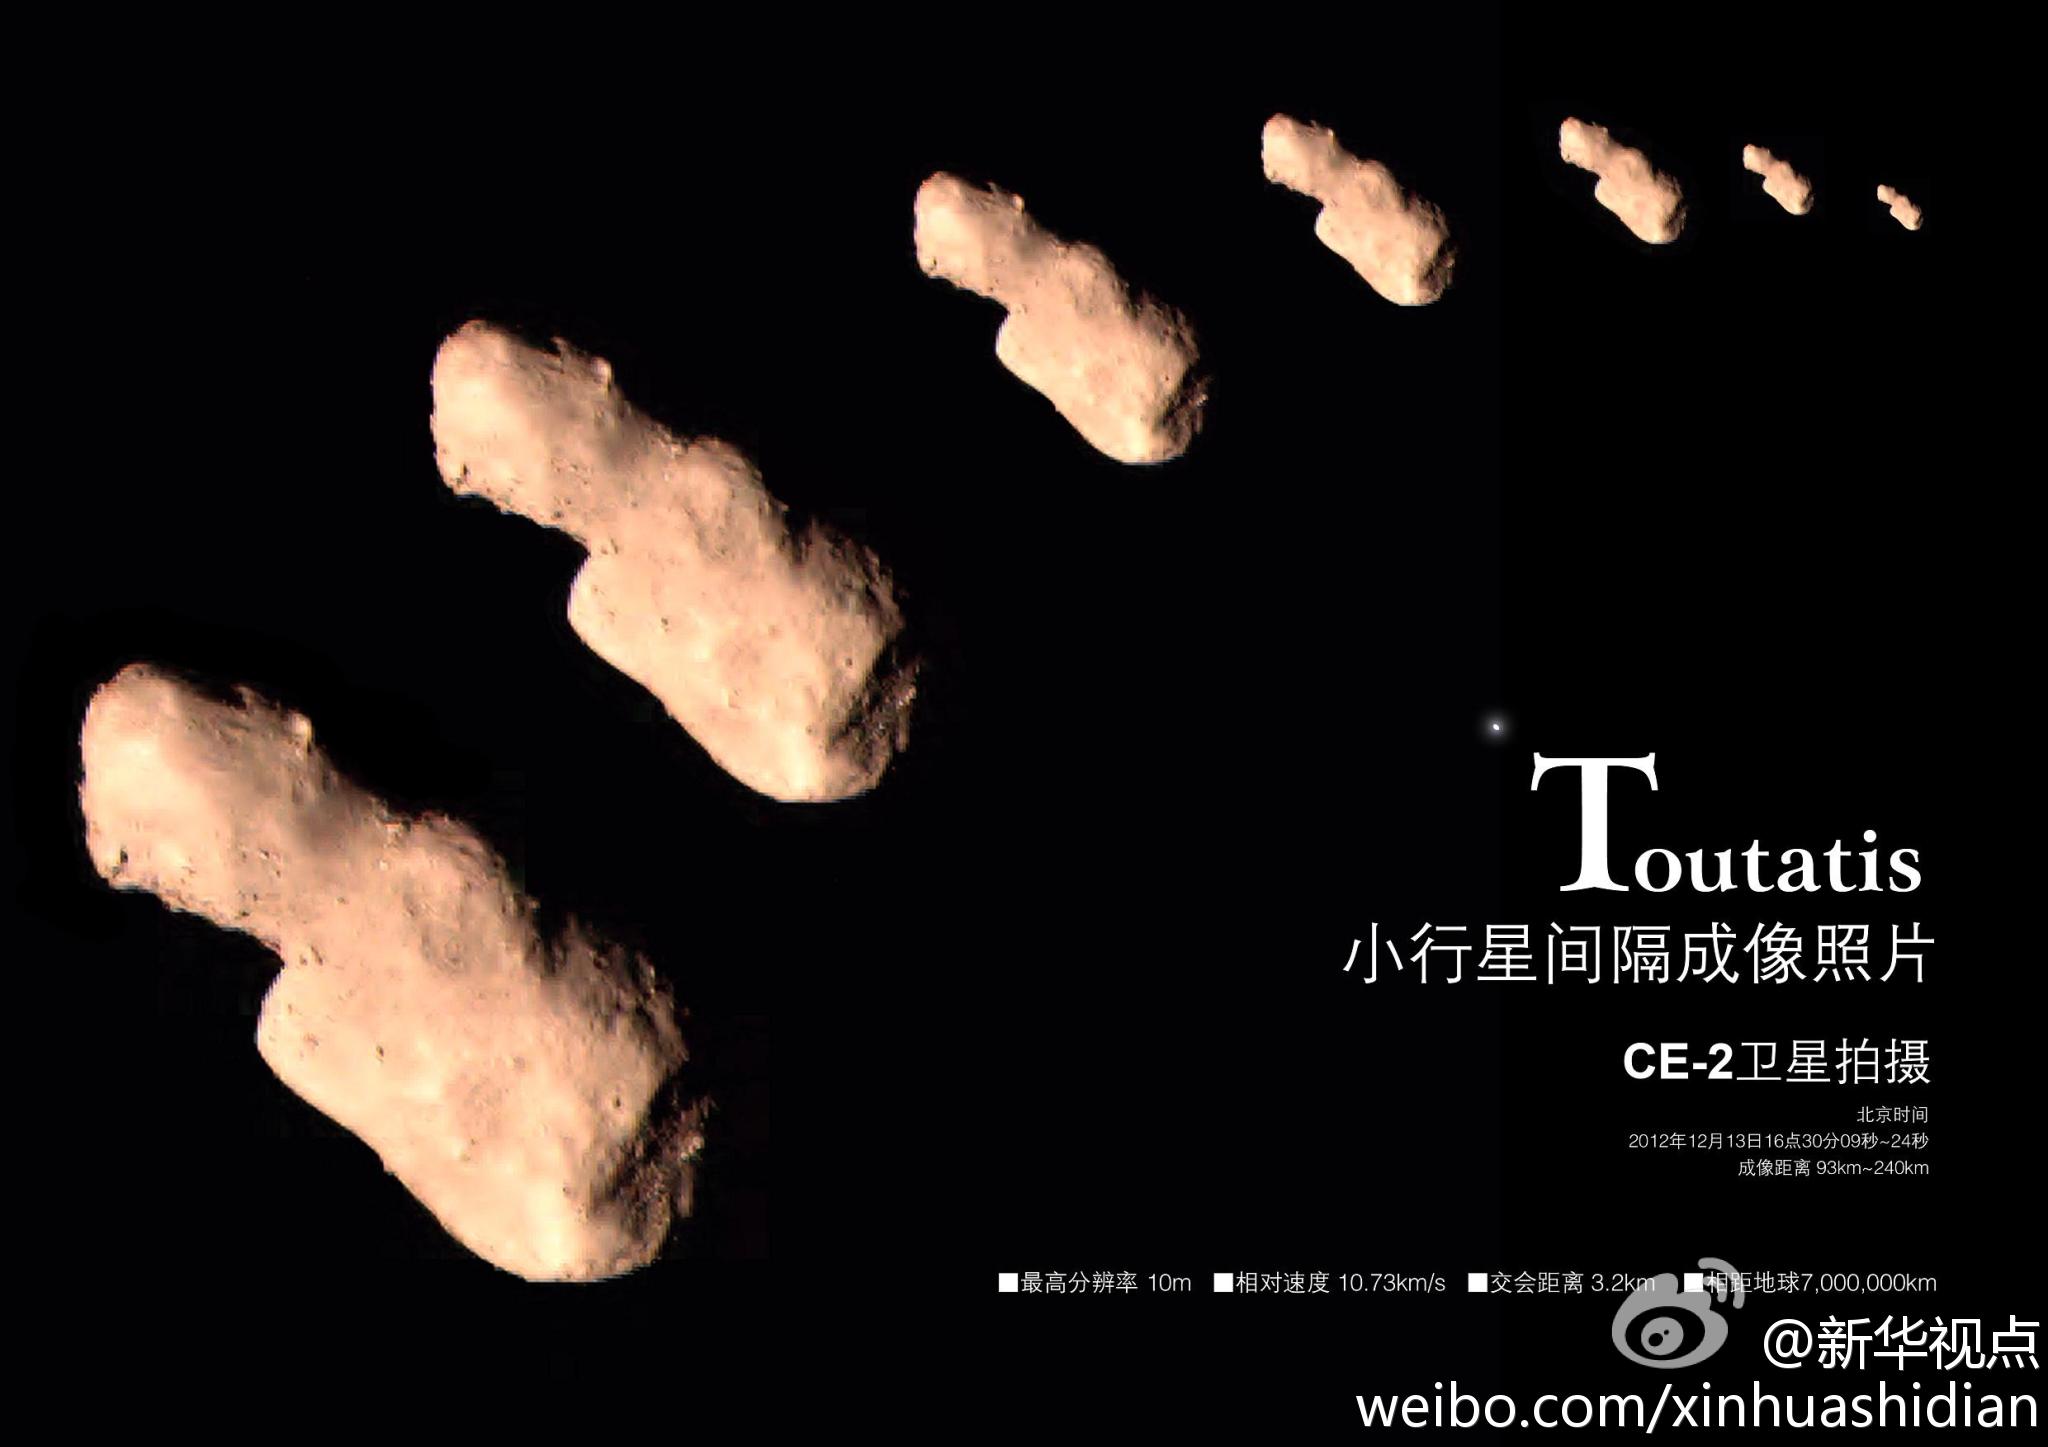 Chang E 2 Imaging Of Toutatis Succeeded Beyond My Expectations Images, Photos, Reviews